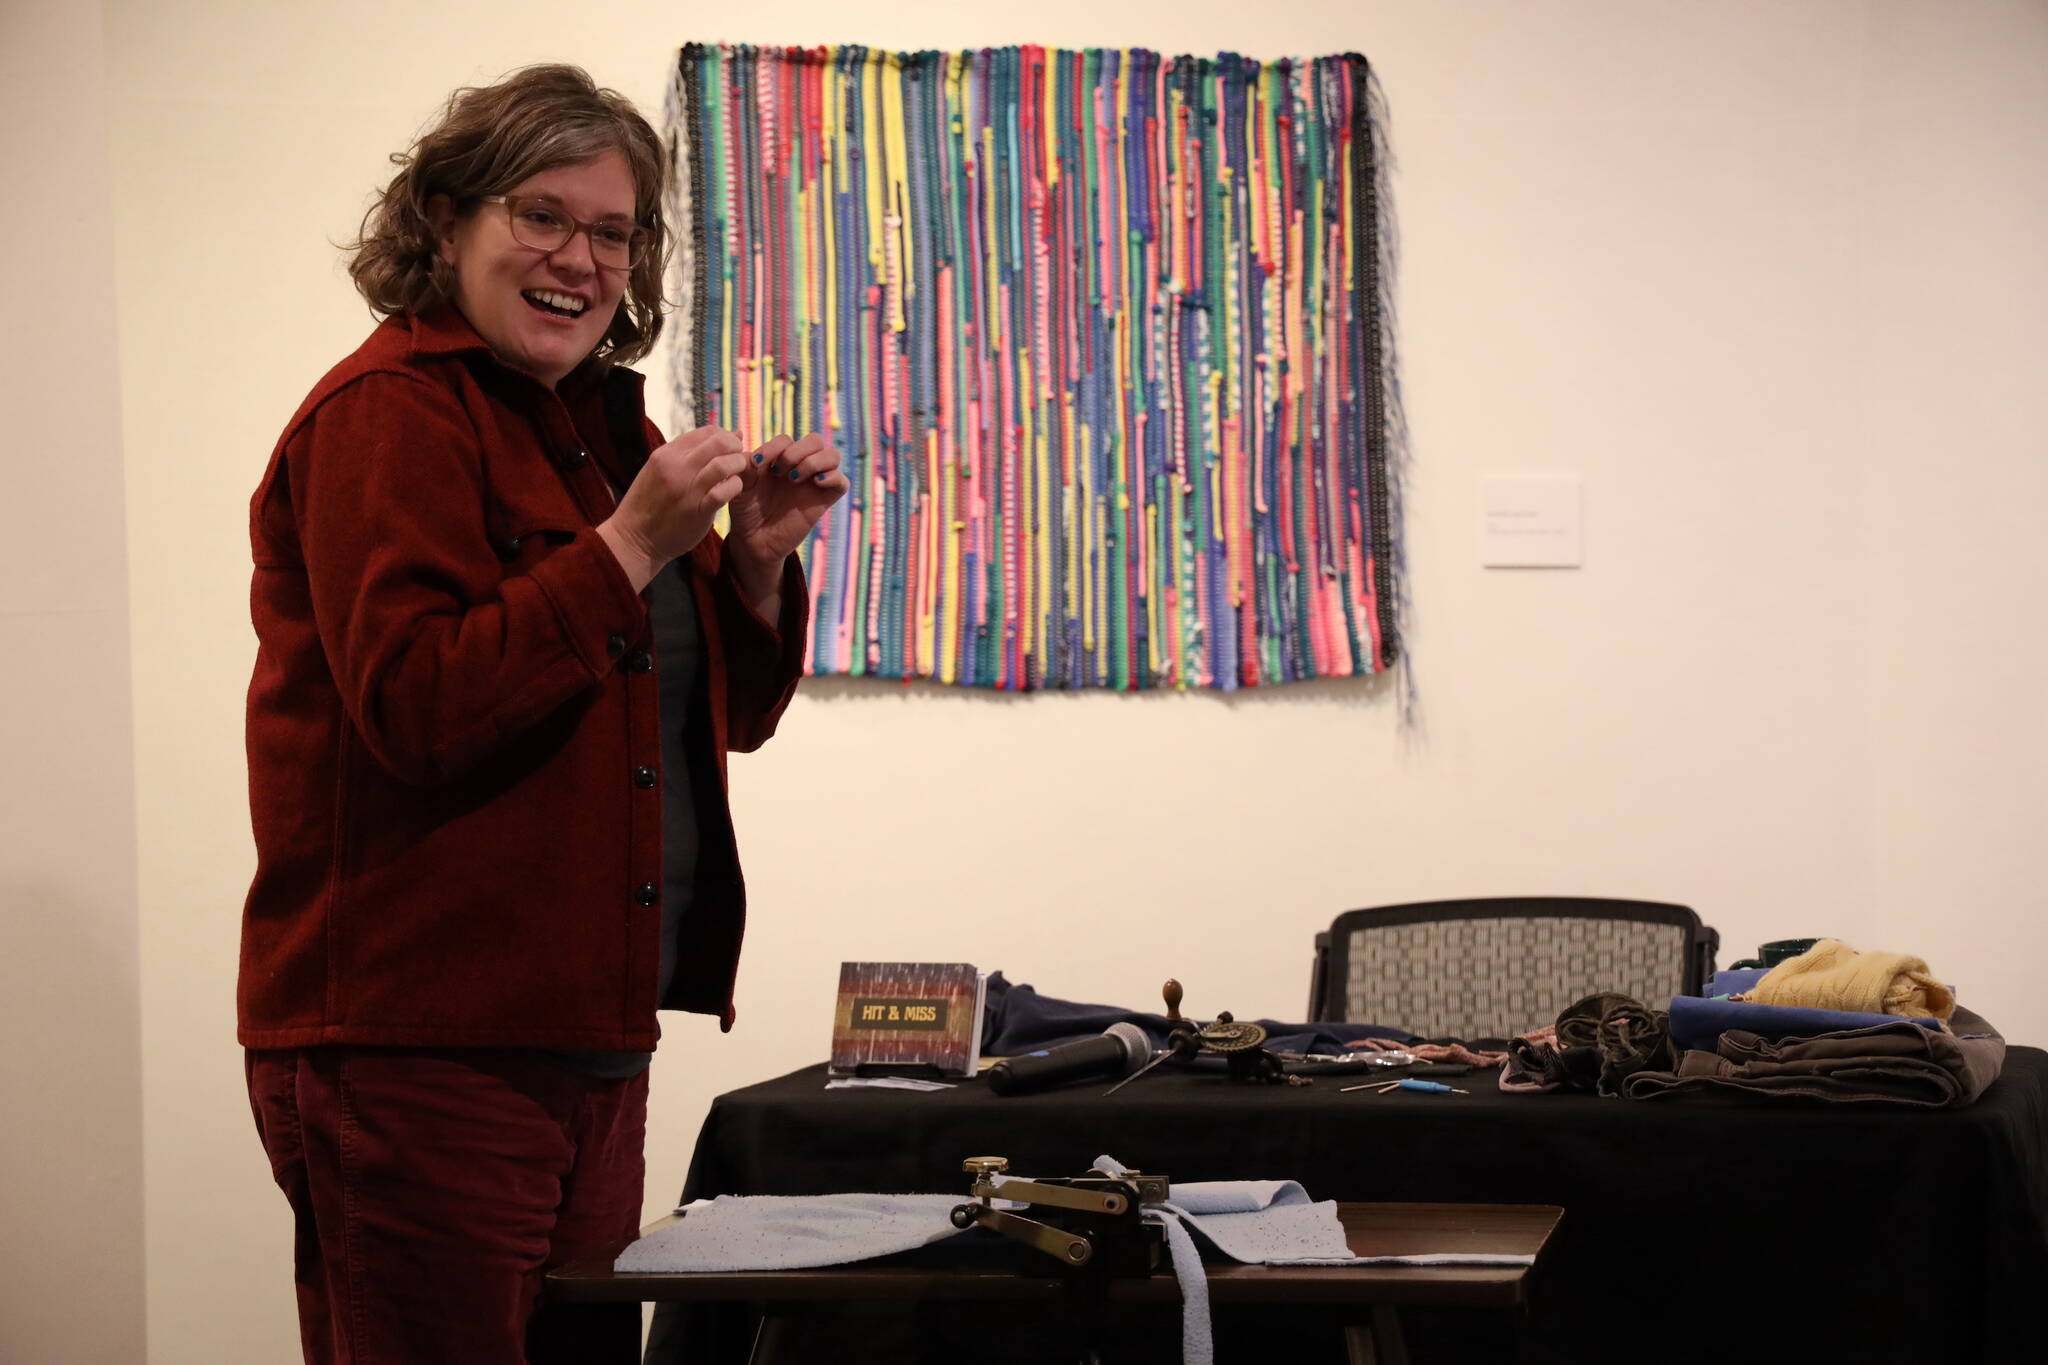 Multidisciplinary artist Mary McEwen talks about her experience learning to weave during her Artist Talk Saturday morning about her exhibition, “Hit & Miss: Adventures in Textile Reuse,” at the Juneau-Douglas City Museum. (Clarise Larson / Juneau Empire)